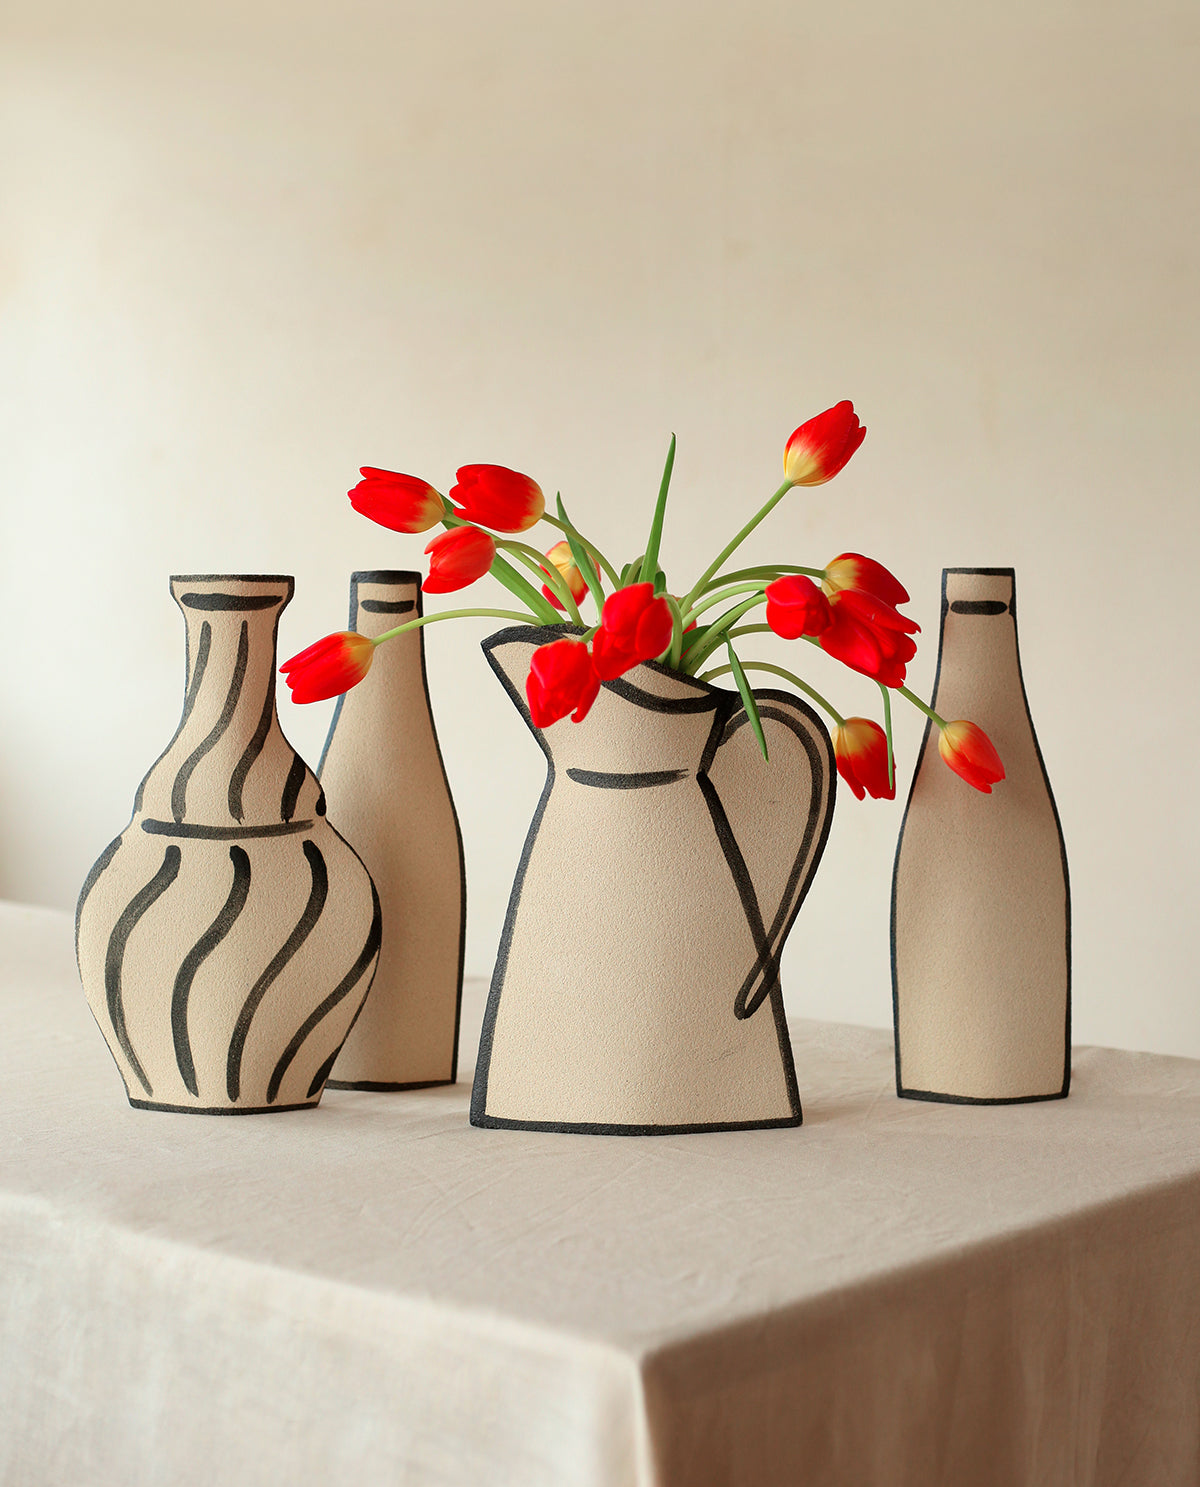 Hand-painted trompe l'oeil vase by INI CERAMIQUE with illustrative patterns and a textured finish